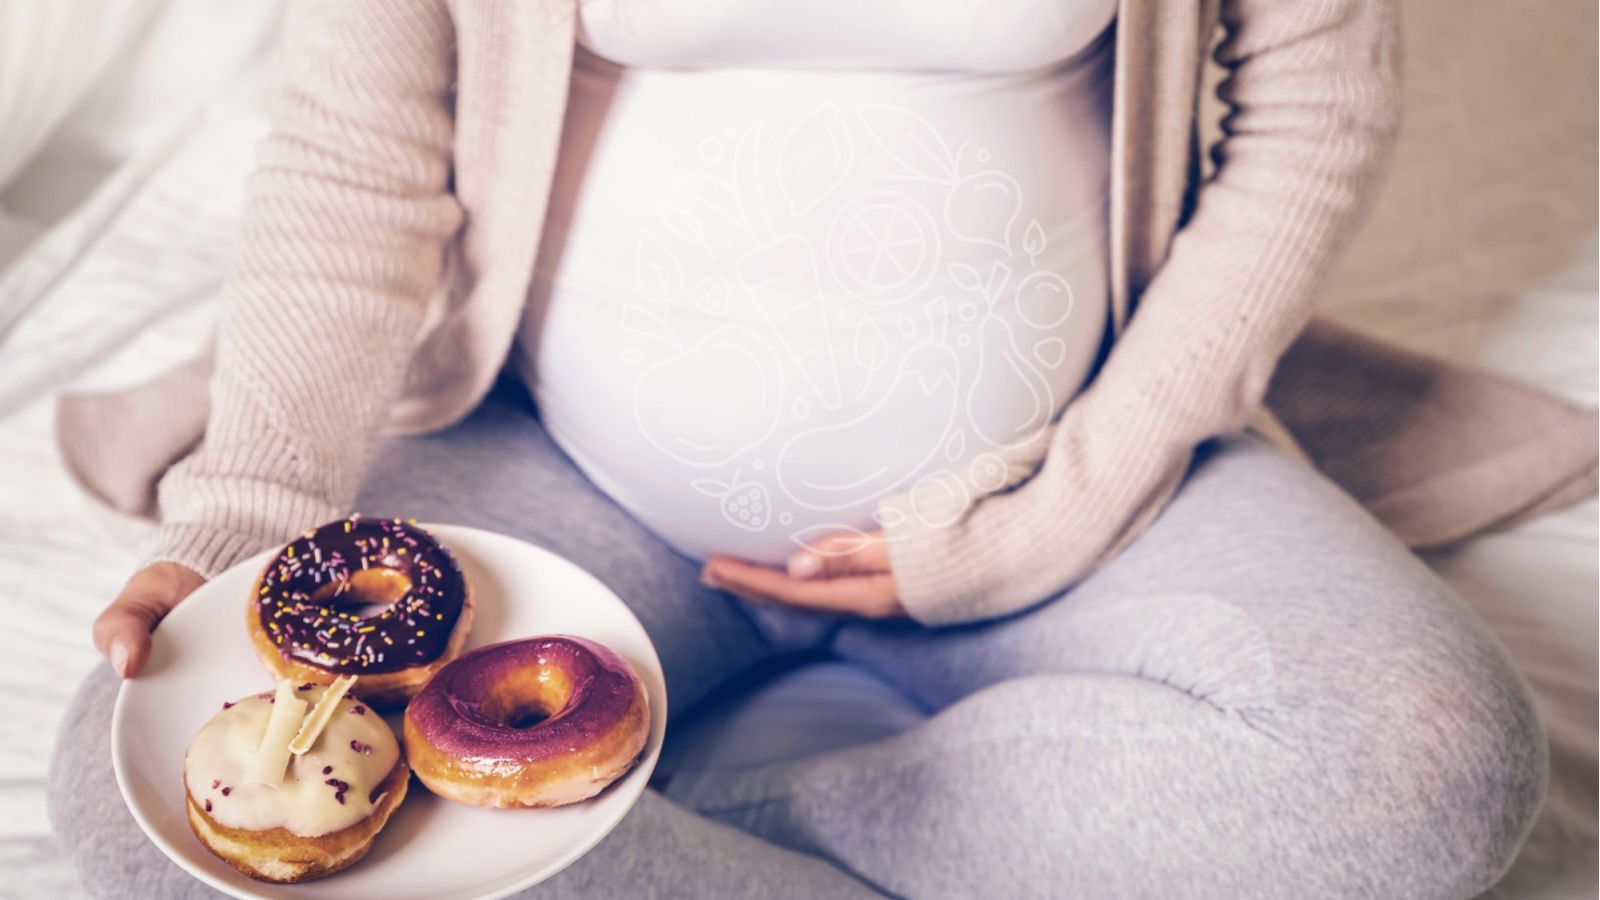 How to avoid gestational diabetes while pregnant